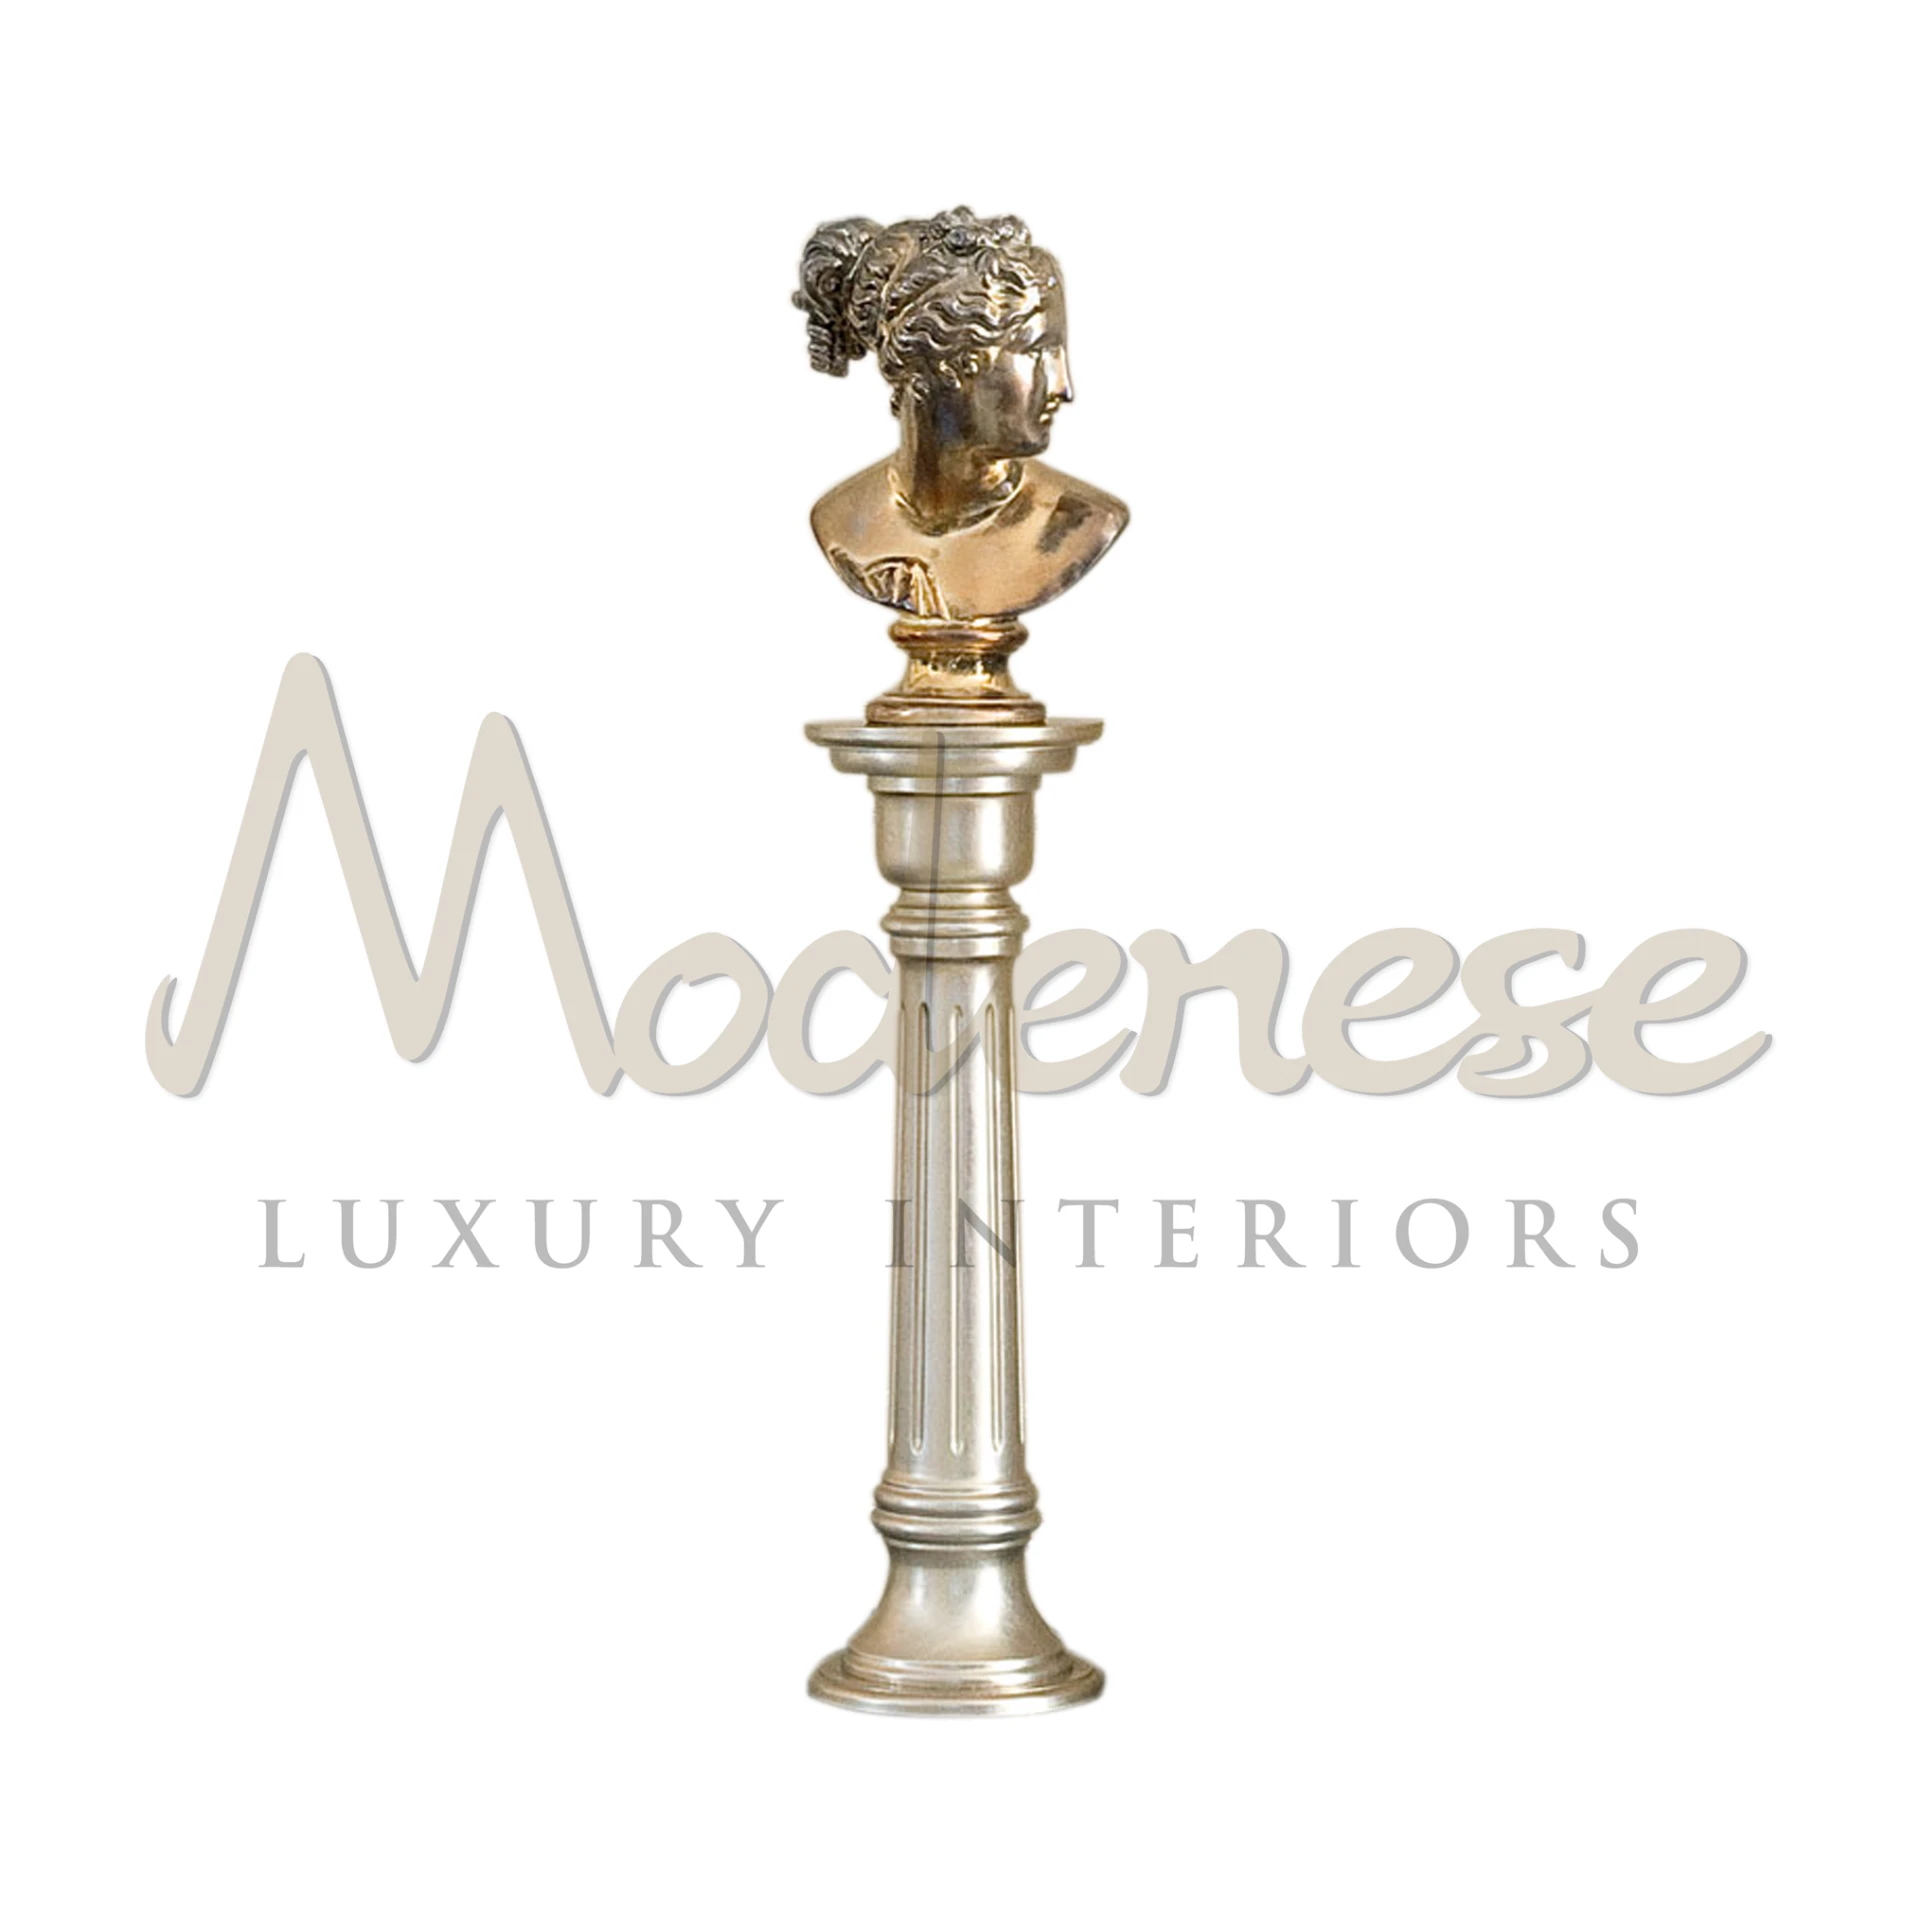 Silver Leaf Vase Stand by Modenese, a luxury piece that brings ancient elegance to modern interiors.